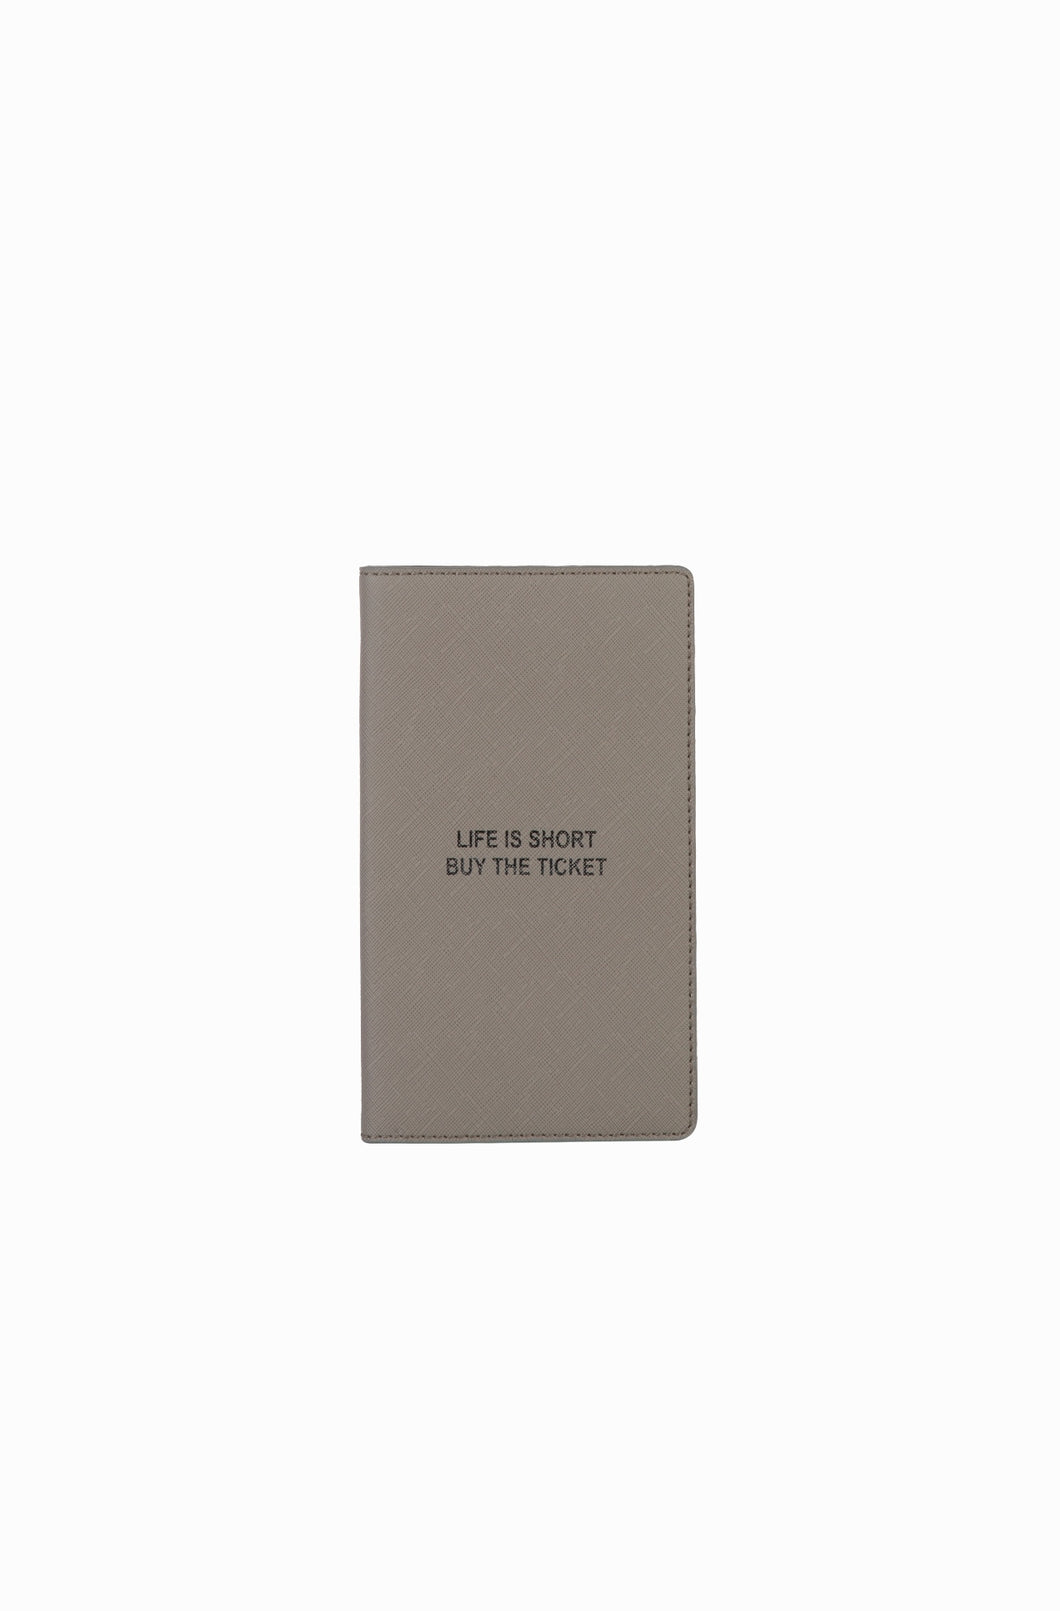 By The Ticket Travel Wallet, M-5863